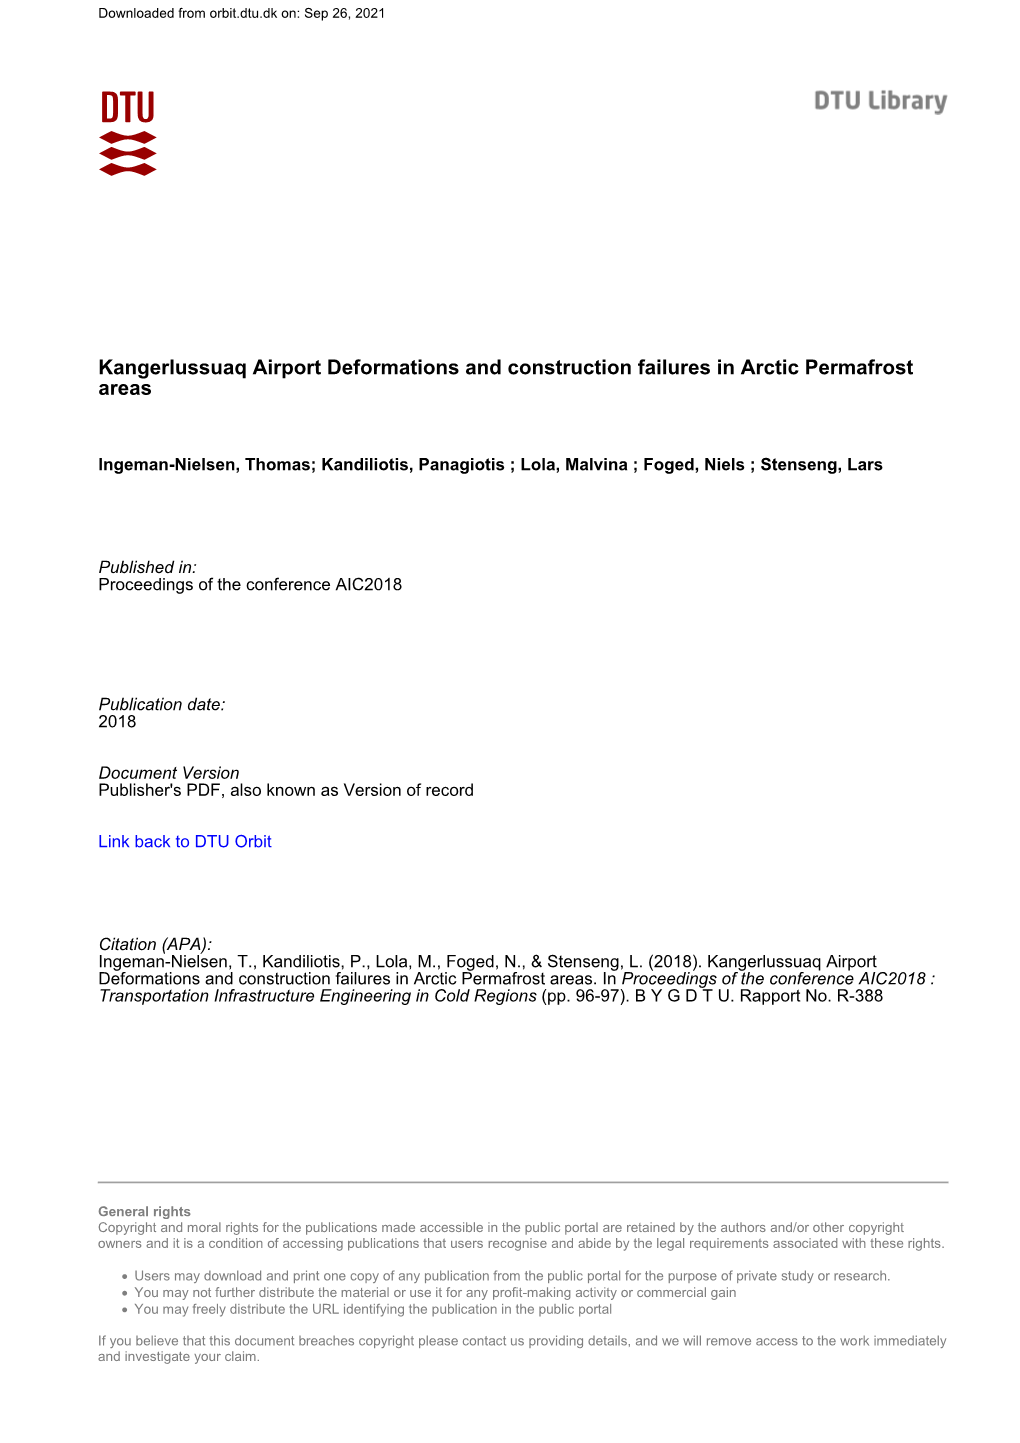 Kangerlussuaq Airport Deformations and Construction Failures in Arctic Permafrost Areas